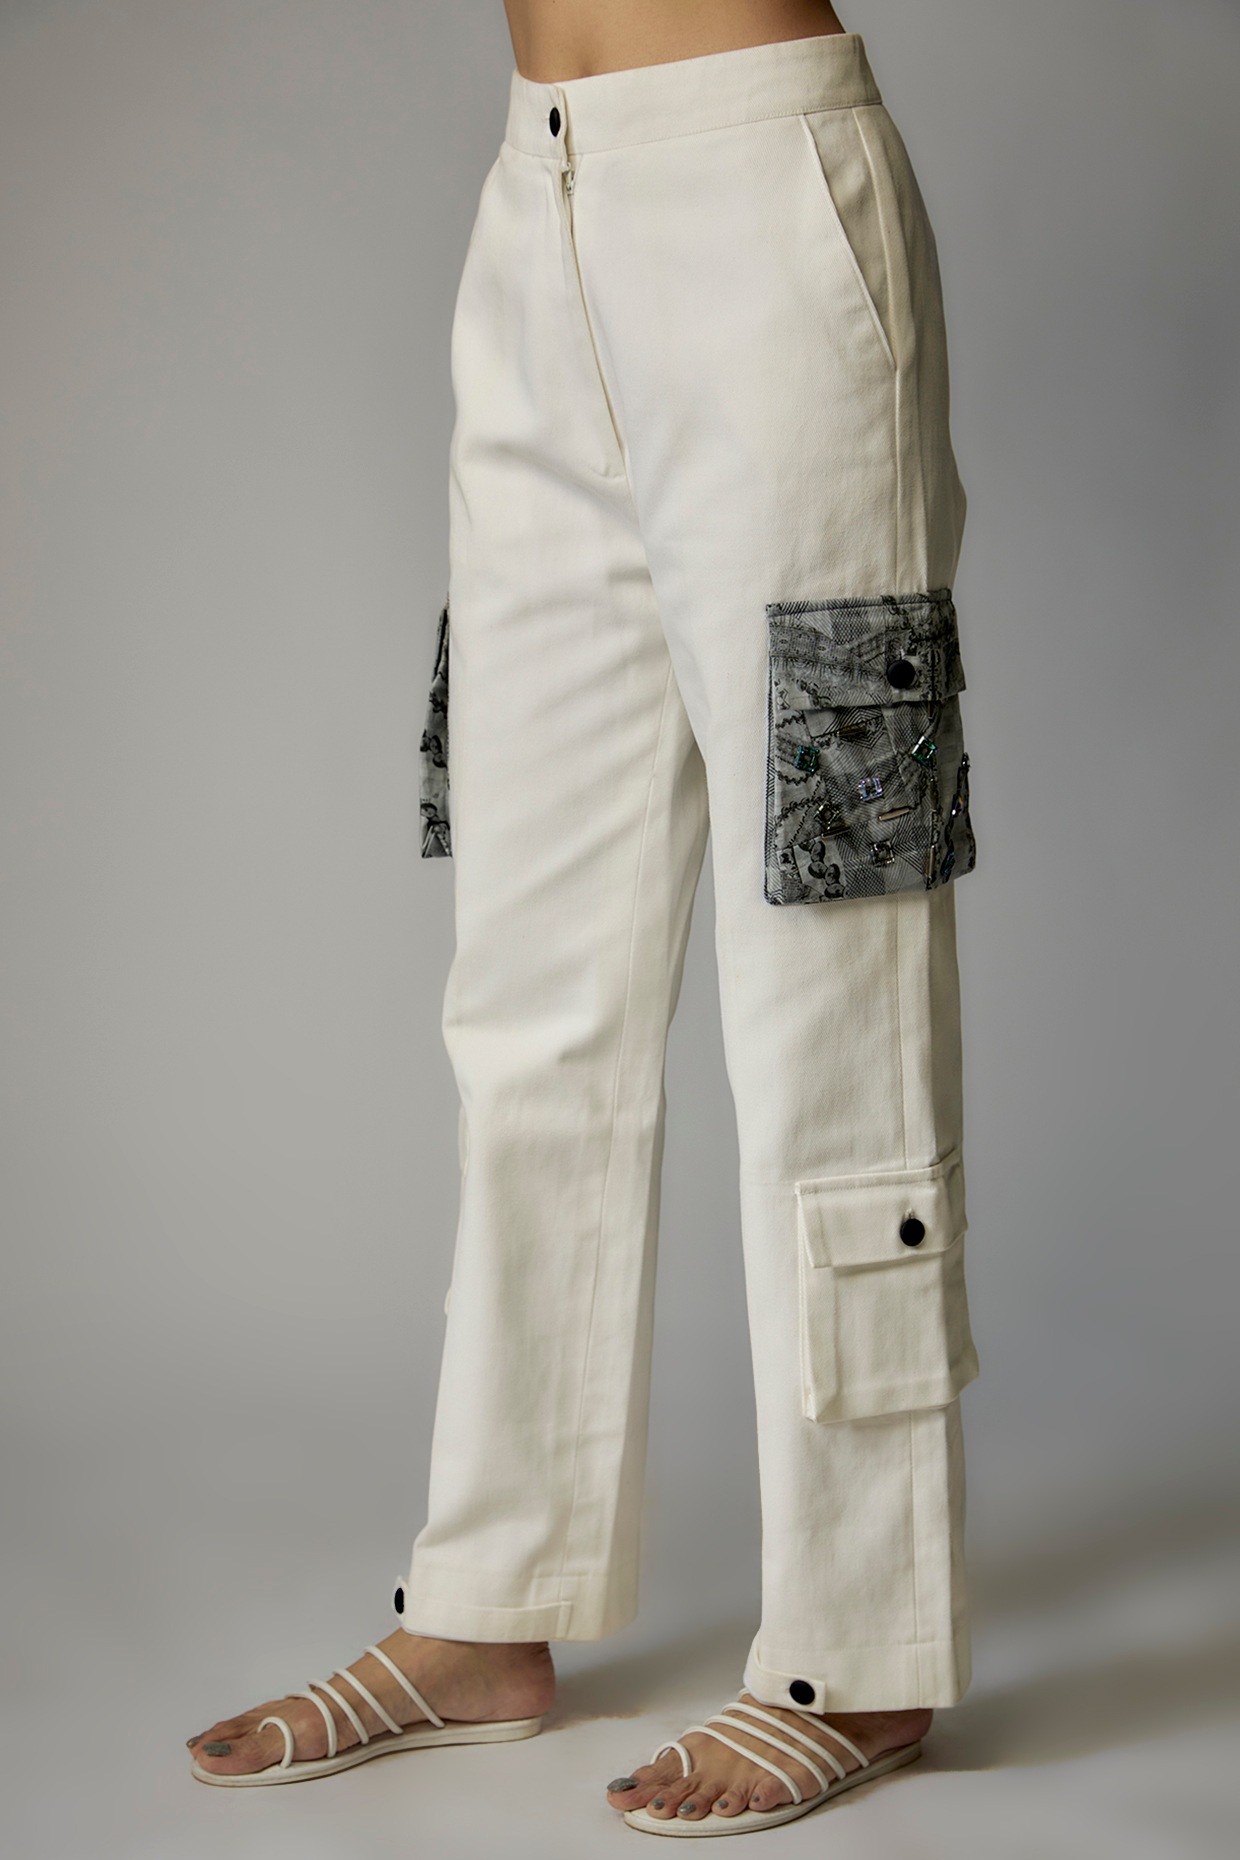 Buy Banana Republic Tapered Denim Cargo trousers from the Gap online shop